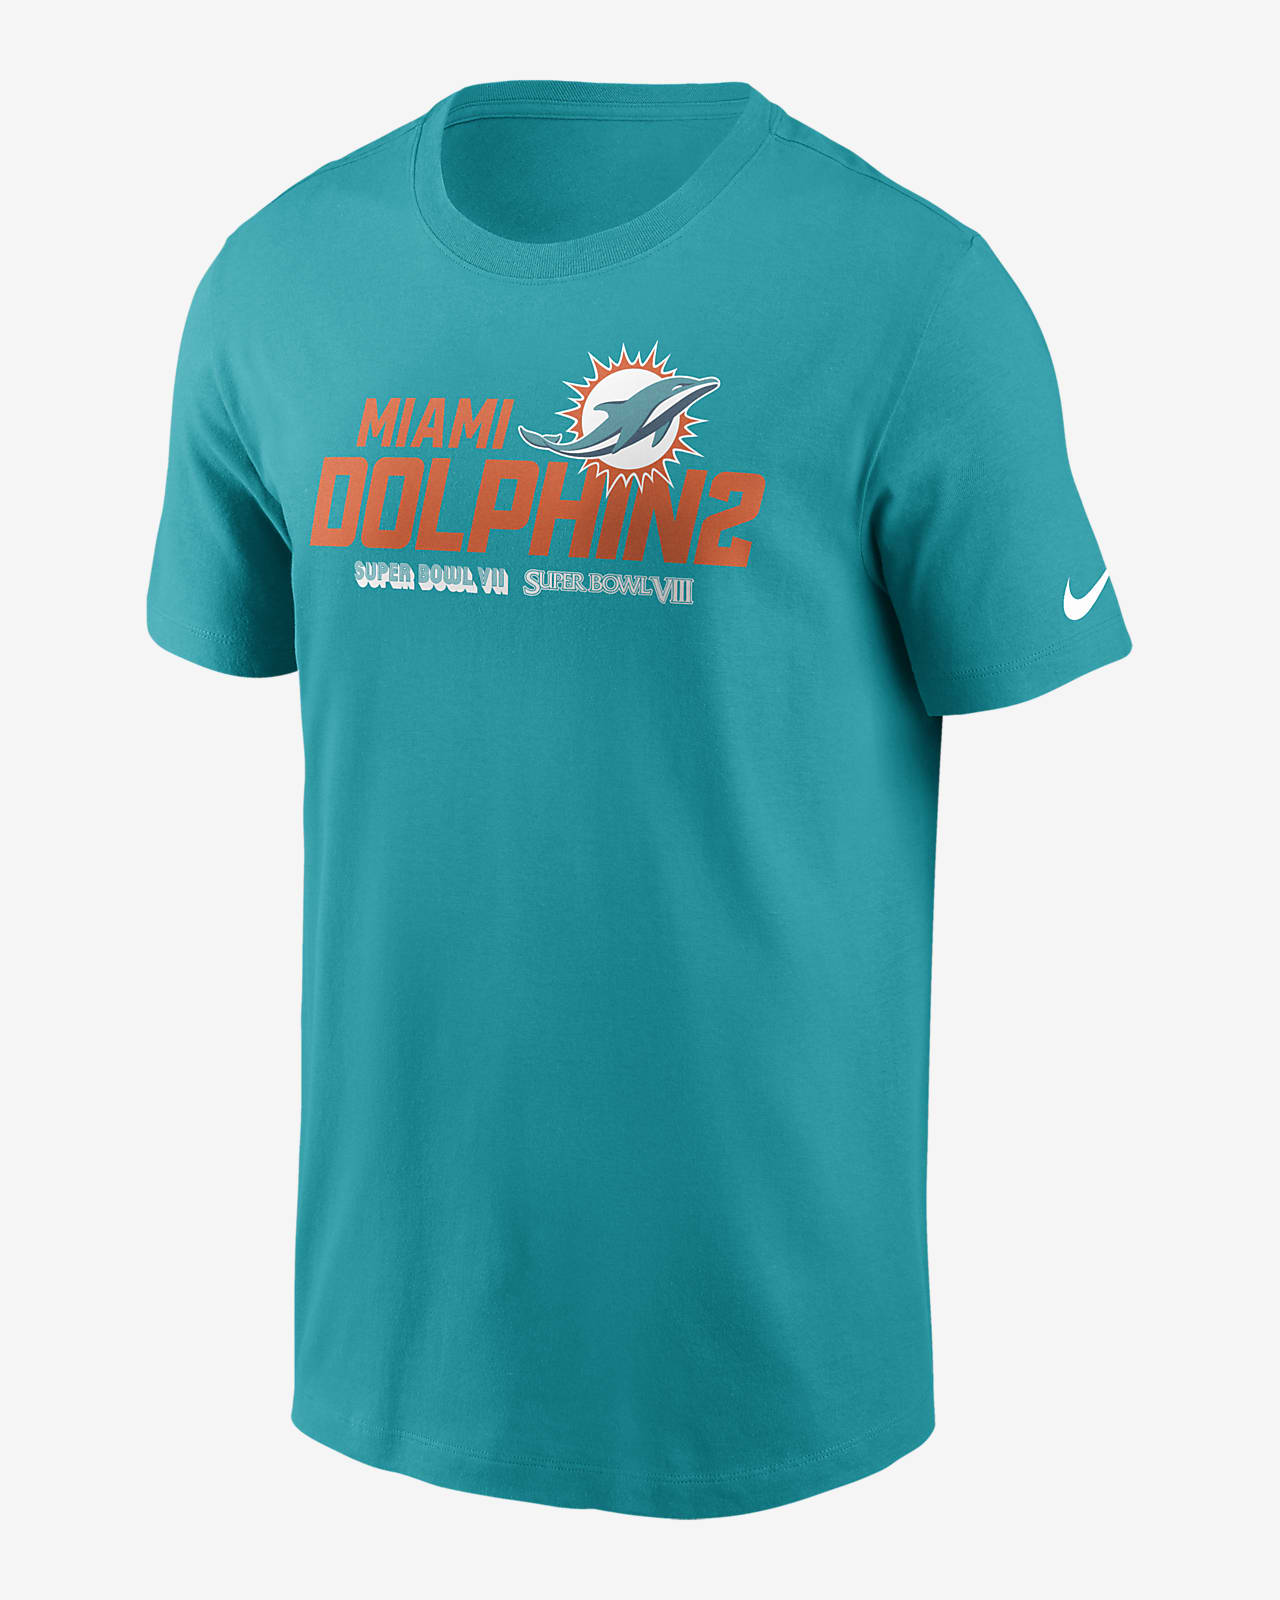 Miami Dolphins Local Essential Men's Nike NFL T-Shirt